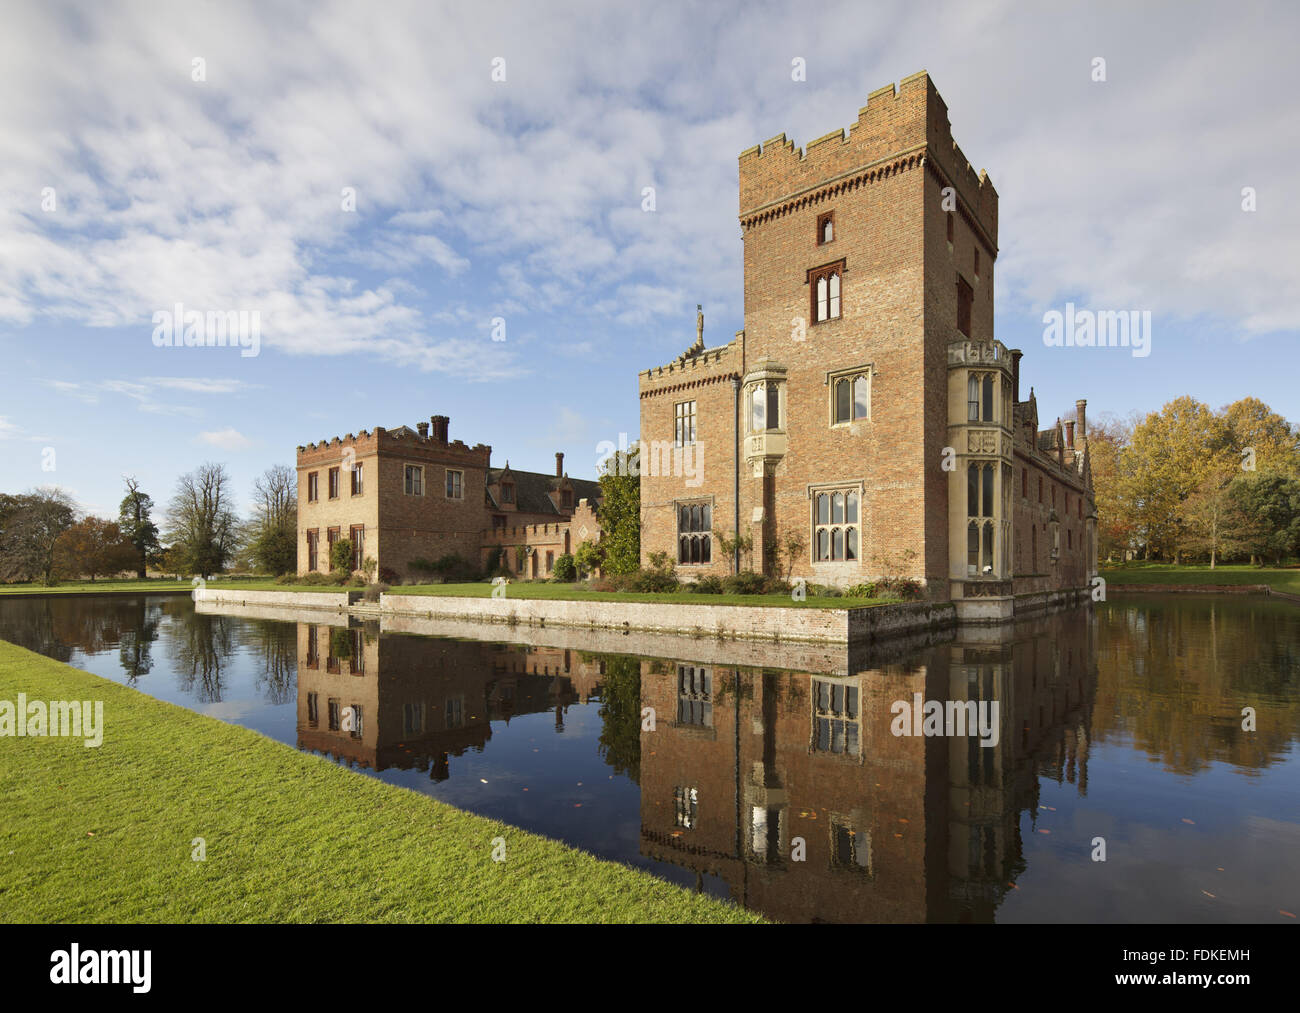 View over the moat of the south range of Oxburgh Hall, Norfolk. Sir Edmund Bedingfeld built Oxburgh Hall in about 1482, but the Great Hall on the south side was demolished in 1775. The battlemented passageway filling the space was added in 1863. Stock Photo